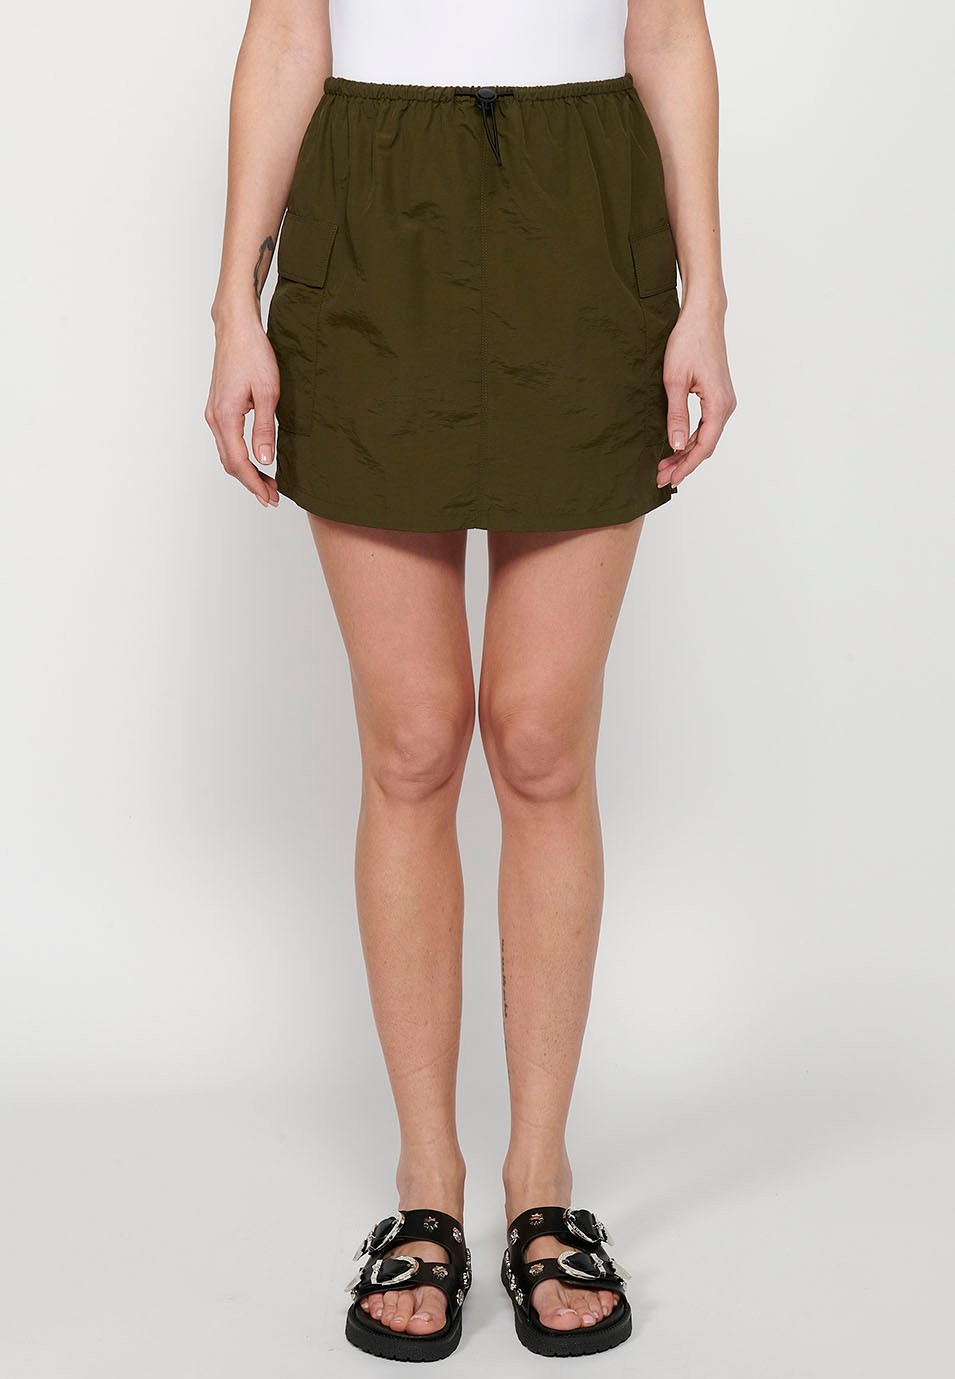 Short skirt with adjustable waist and pockets, khaki color for women